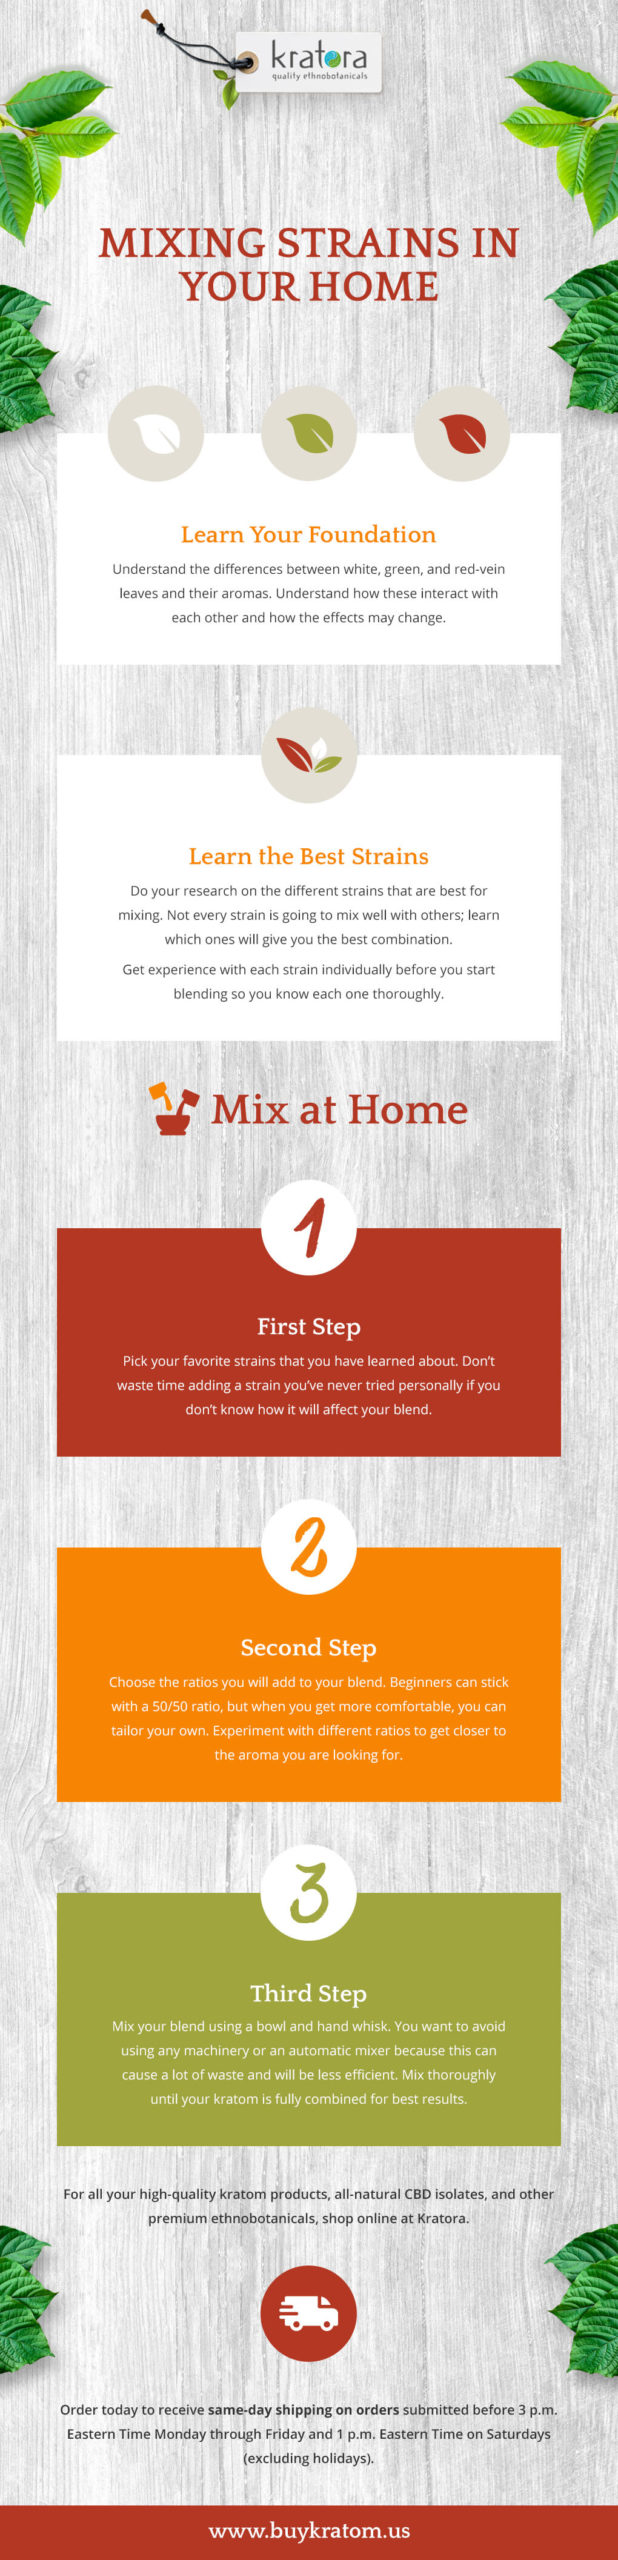 Mixing Kratom Strains - infographic with three steps for mixing at home. 